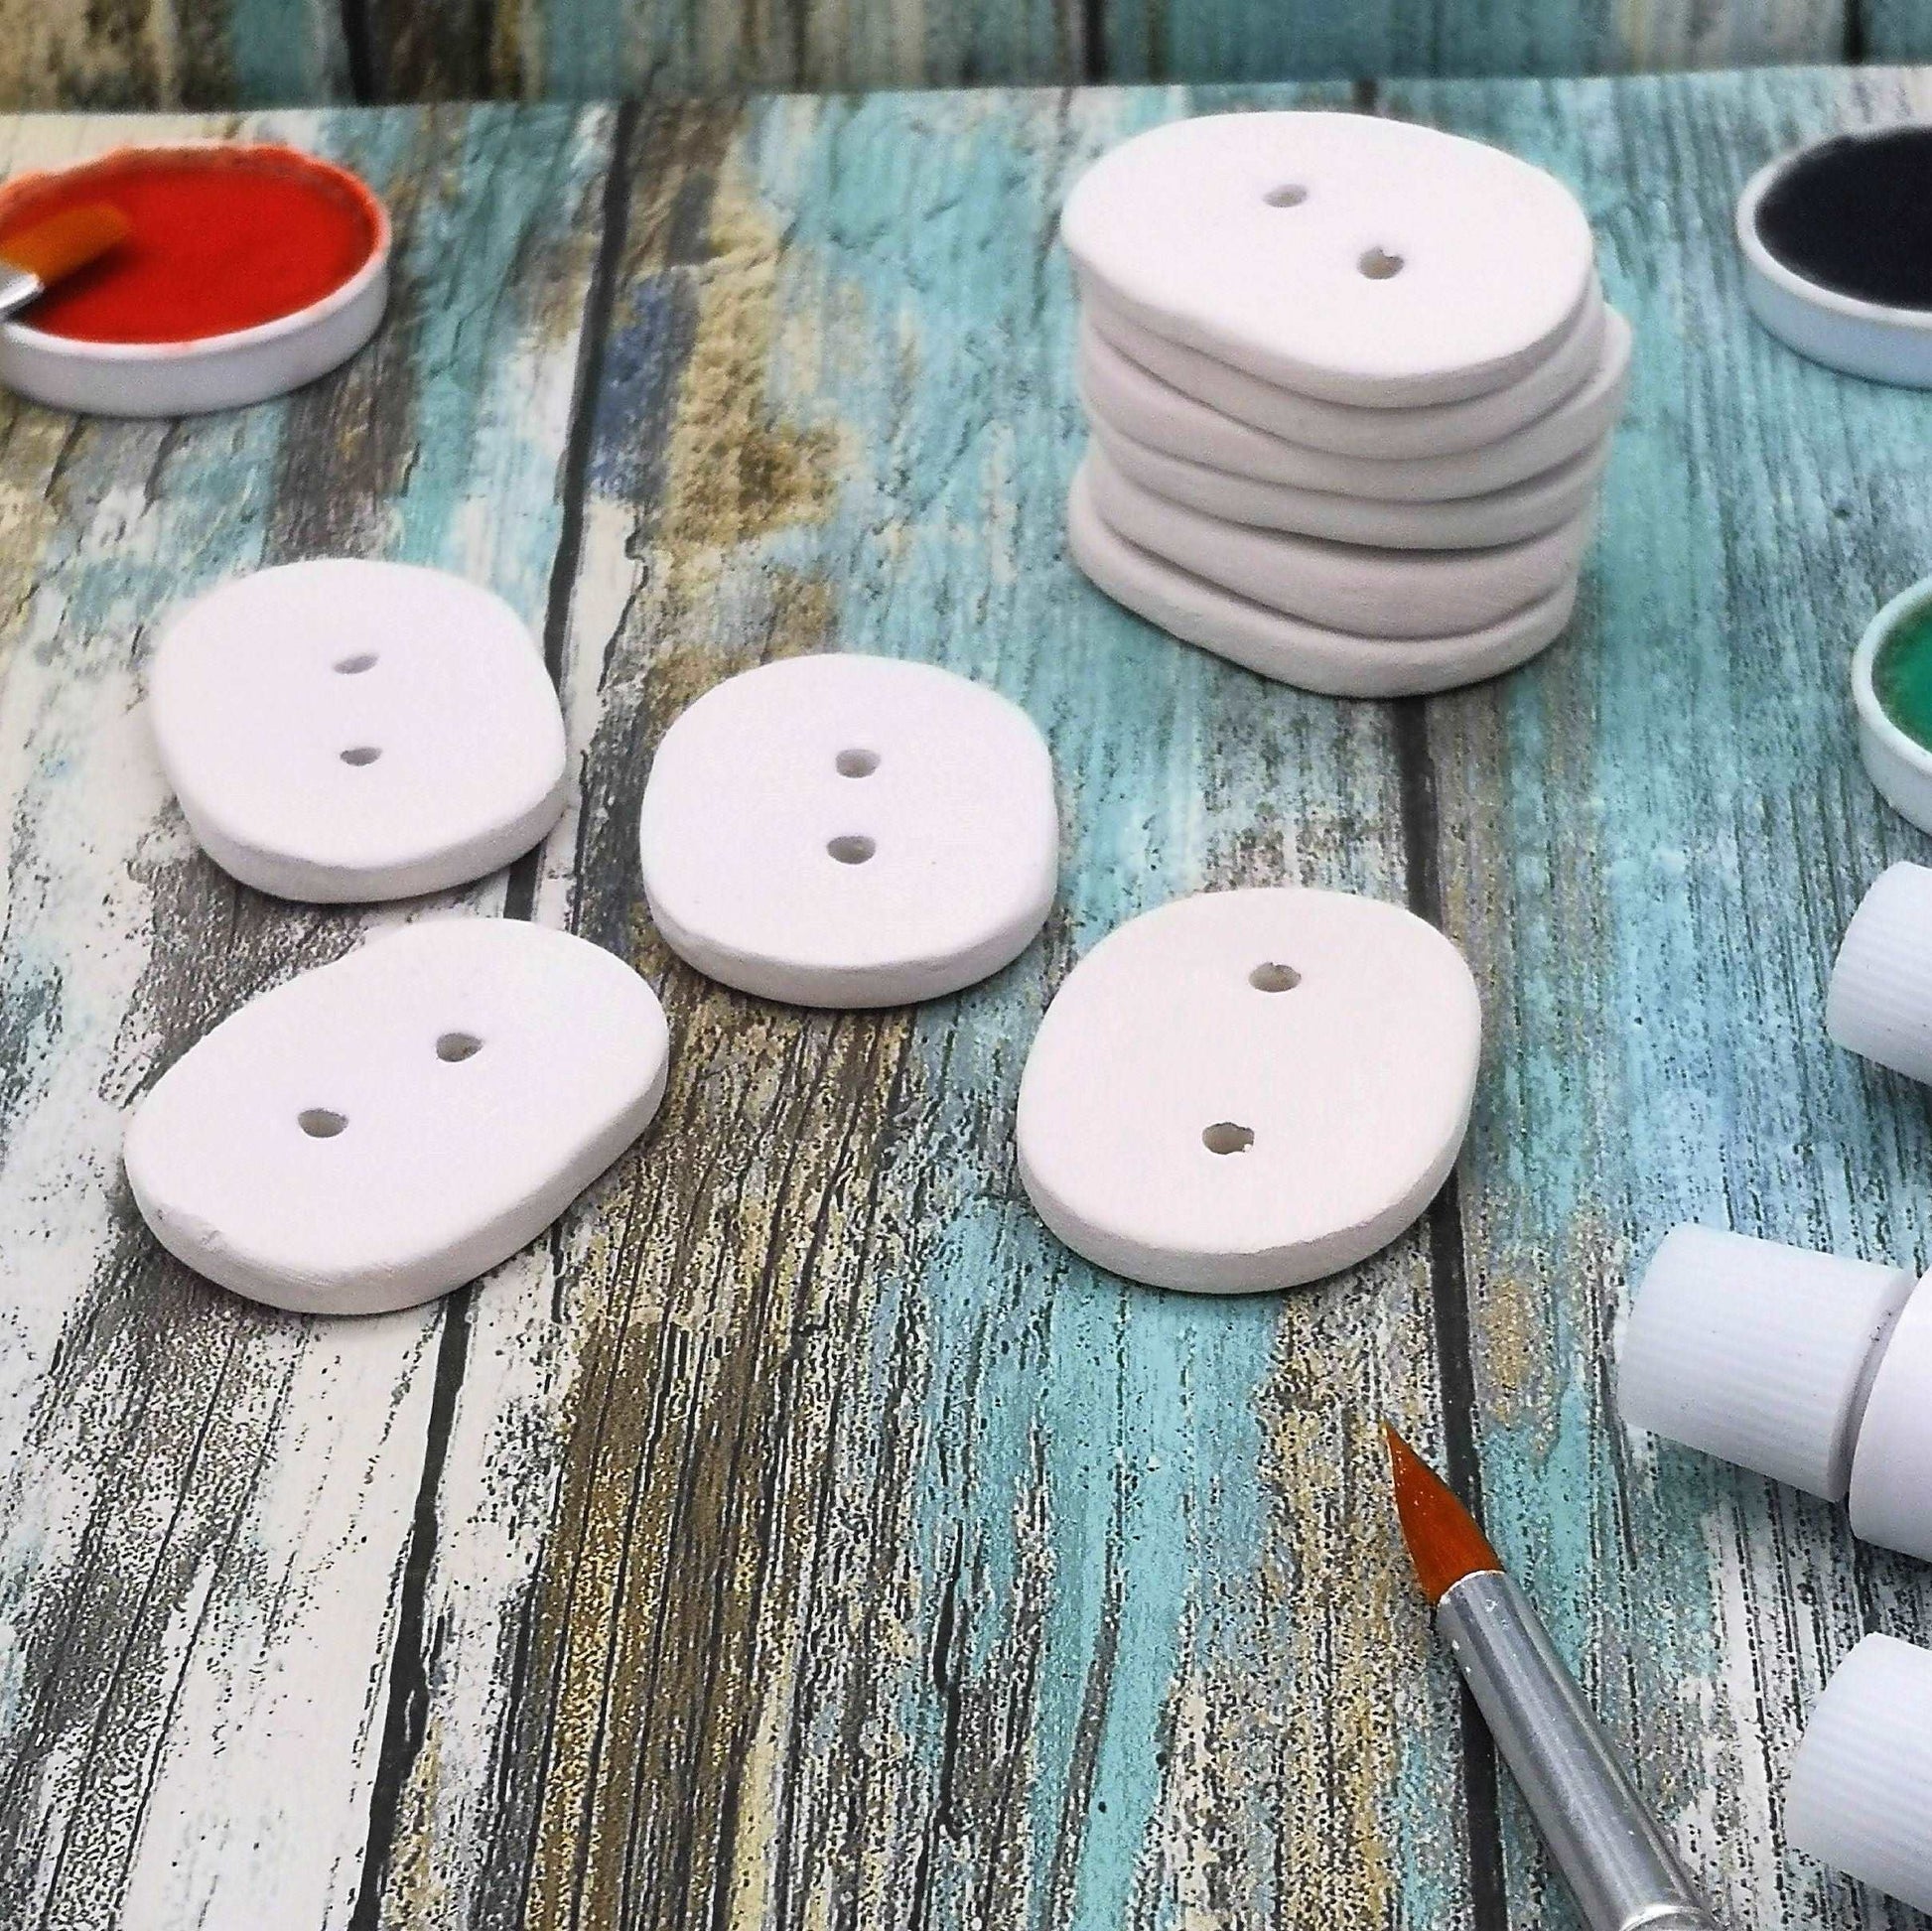 10Pc Large Oval Sewing Buttons, Custom Buttons Diy Craft Kit, Best Sellers, Handmade Ceramic Bisque Ready To Paint Sewing Notions